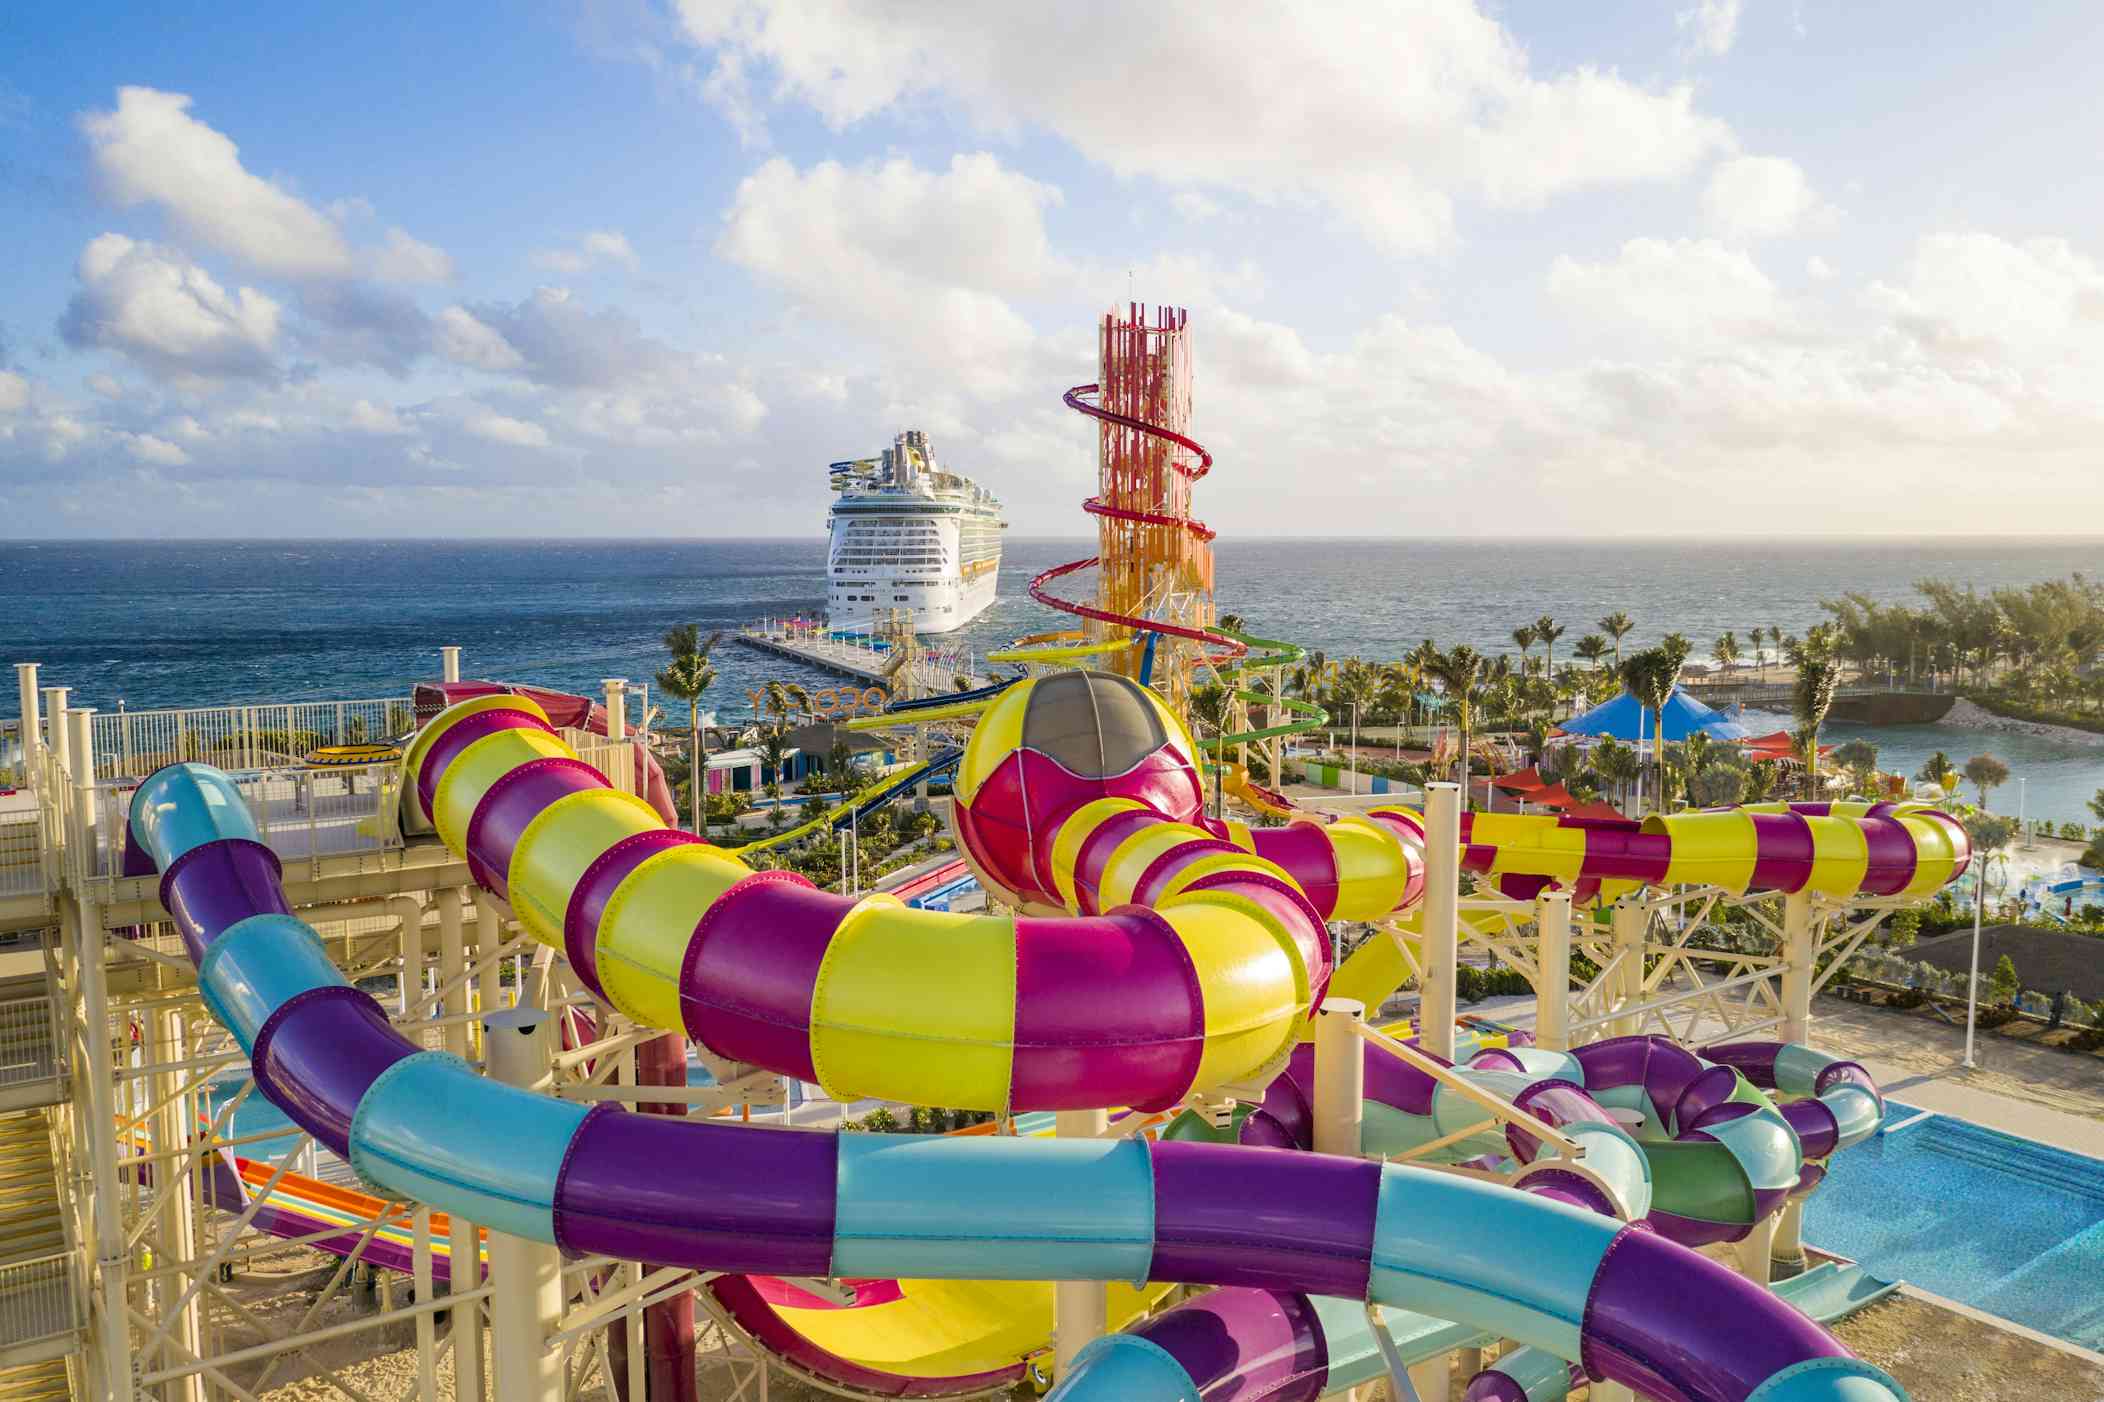 Royal Caribbean on X: Bet you've never seen a park like this at